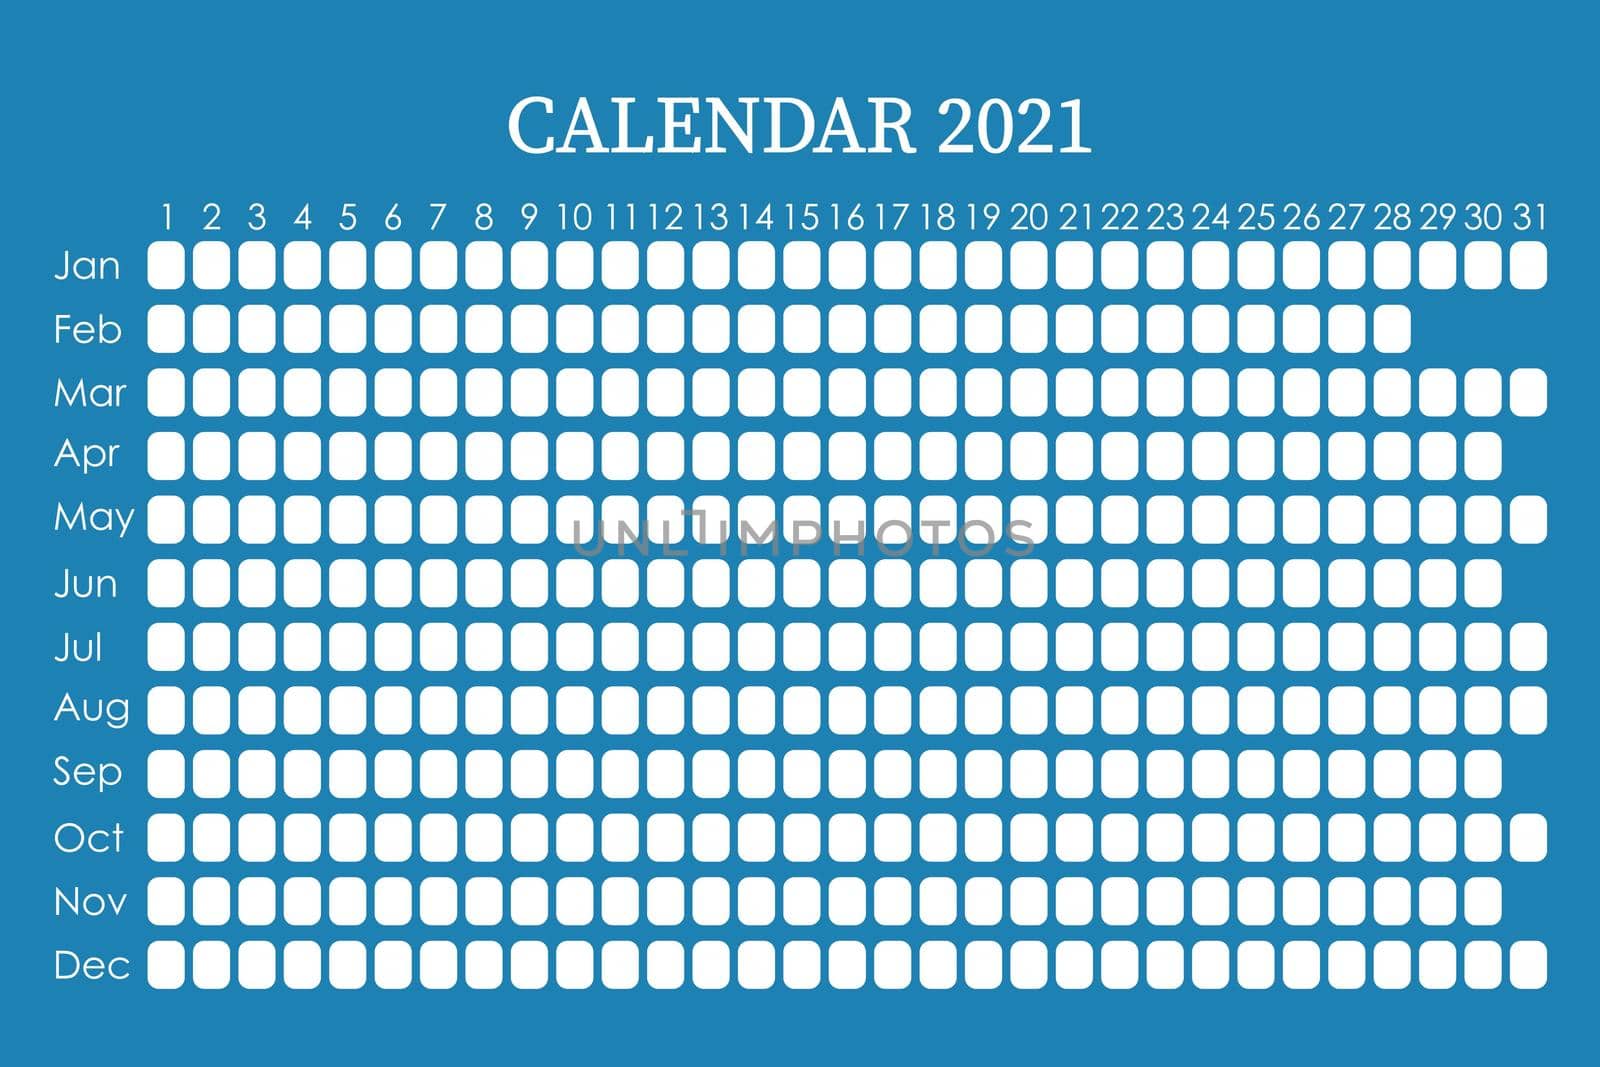 2021 calendar planner. Сorporate design week. Isolated on classic blue background. Place for stickers.